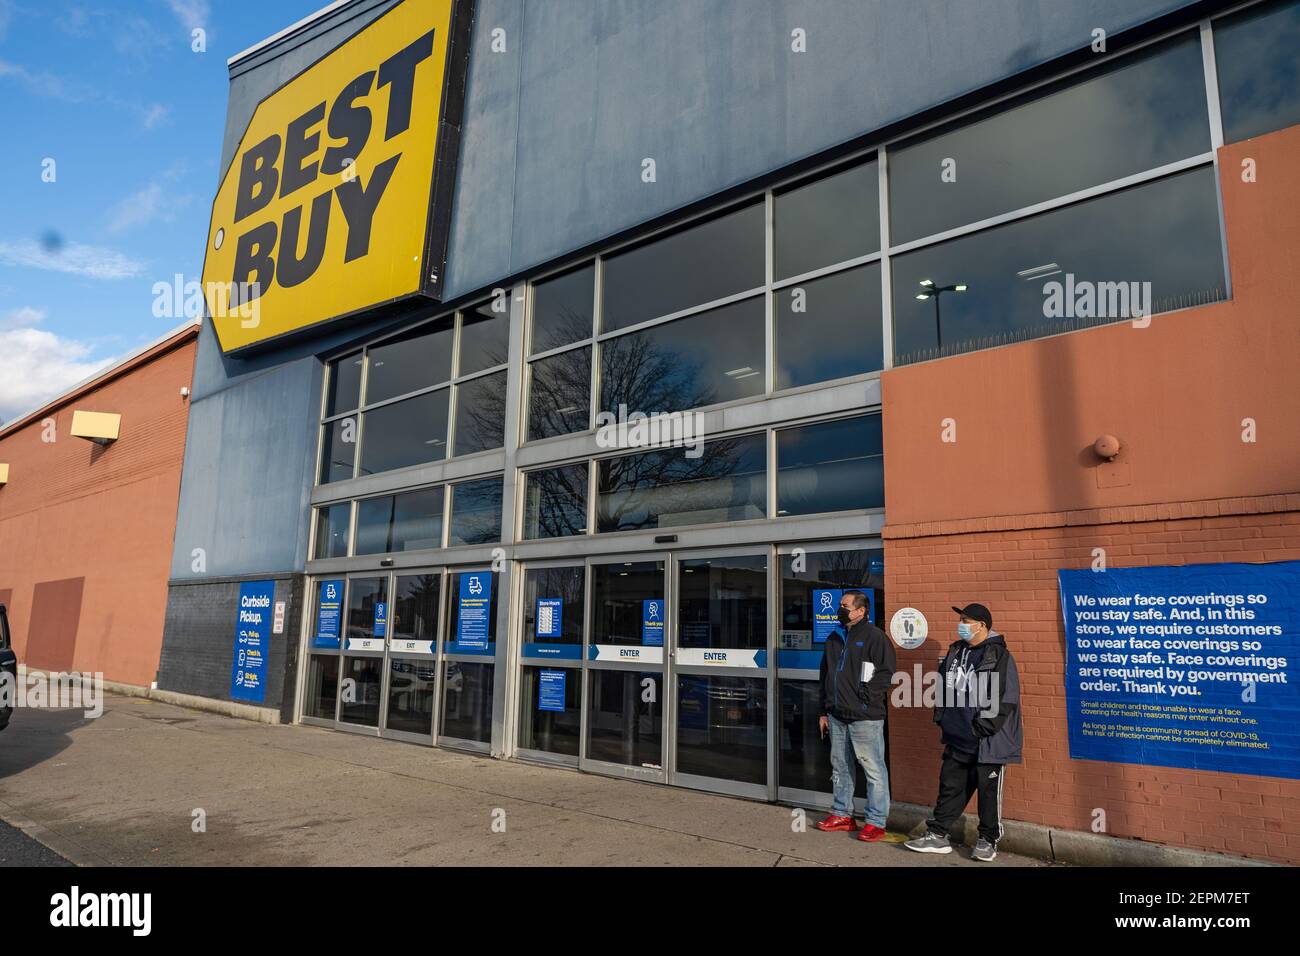 NEW YORK, NY – FEBRUARY 27:  People stand by a Best Buy store in Queens on February 27, 2021 in New York City.  Best Buy Co. (BBY) lays off 5,000 workers, the majority of whom worked full-time and adding approximately 2,000 new part-time positions as it shifts focus to online sales.  The pandemic has accelerated Best Buy's transition to selling online said Chief Executive Corie Barry on a call with analysts on Thursday. Credit: Ron Adar/Alamy Live News Stock Photo